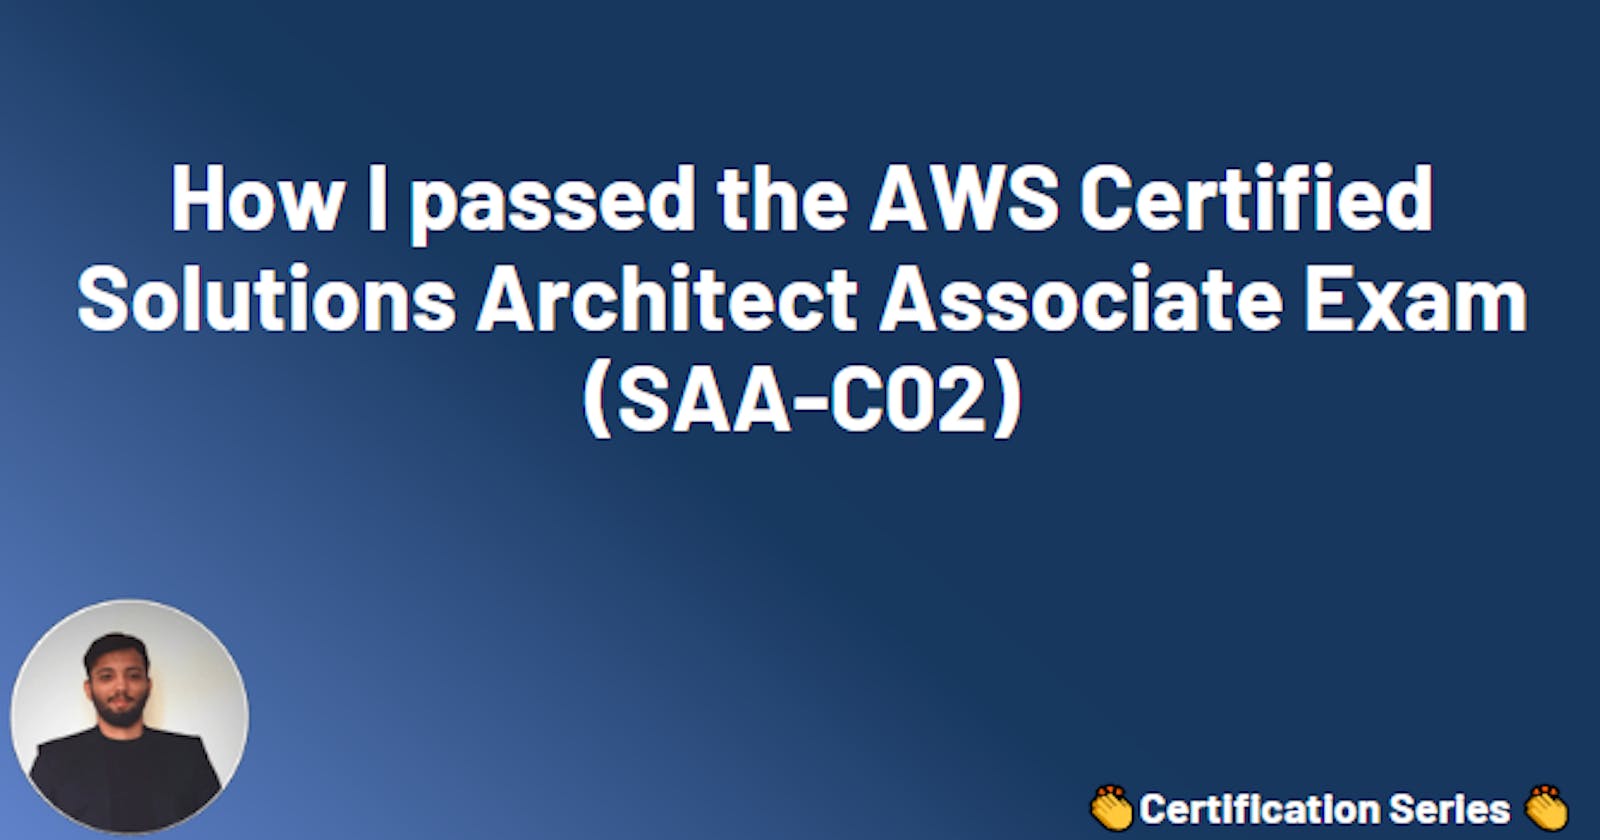 How I passed the AWS Certified Solutions Architect Associate Exam (SAA-C02)